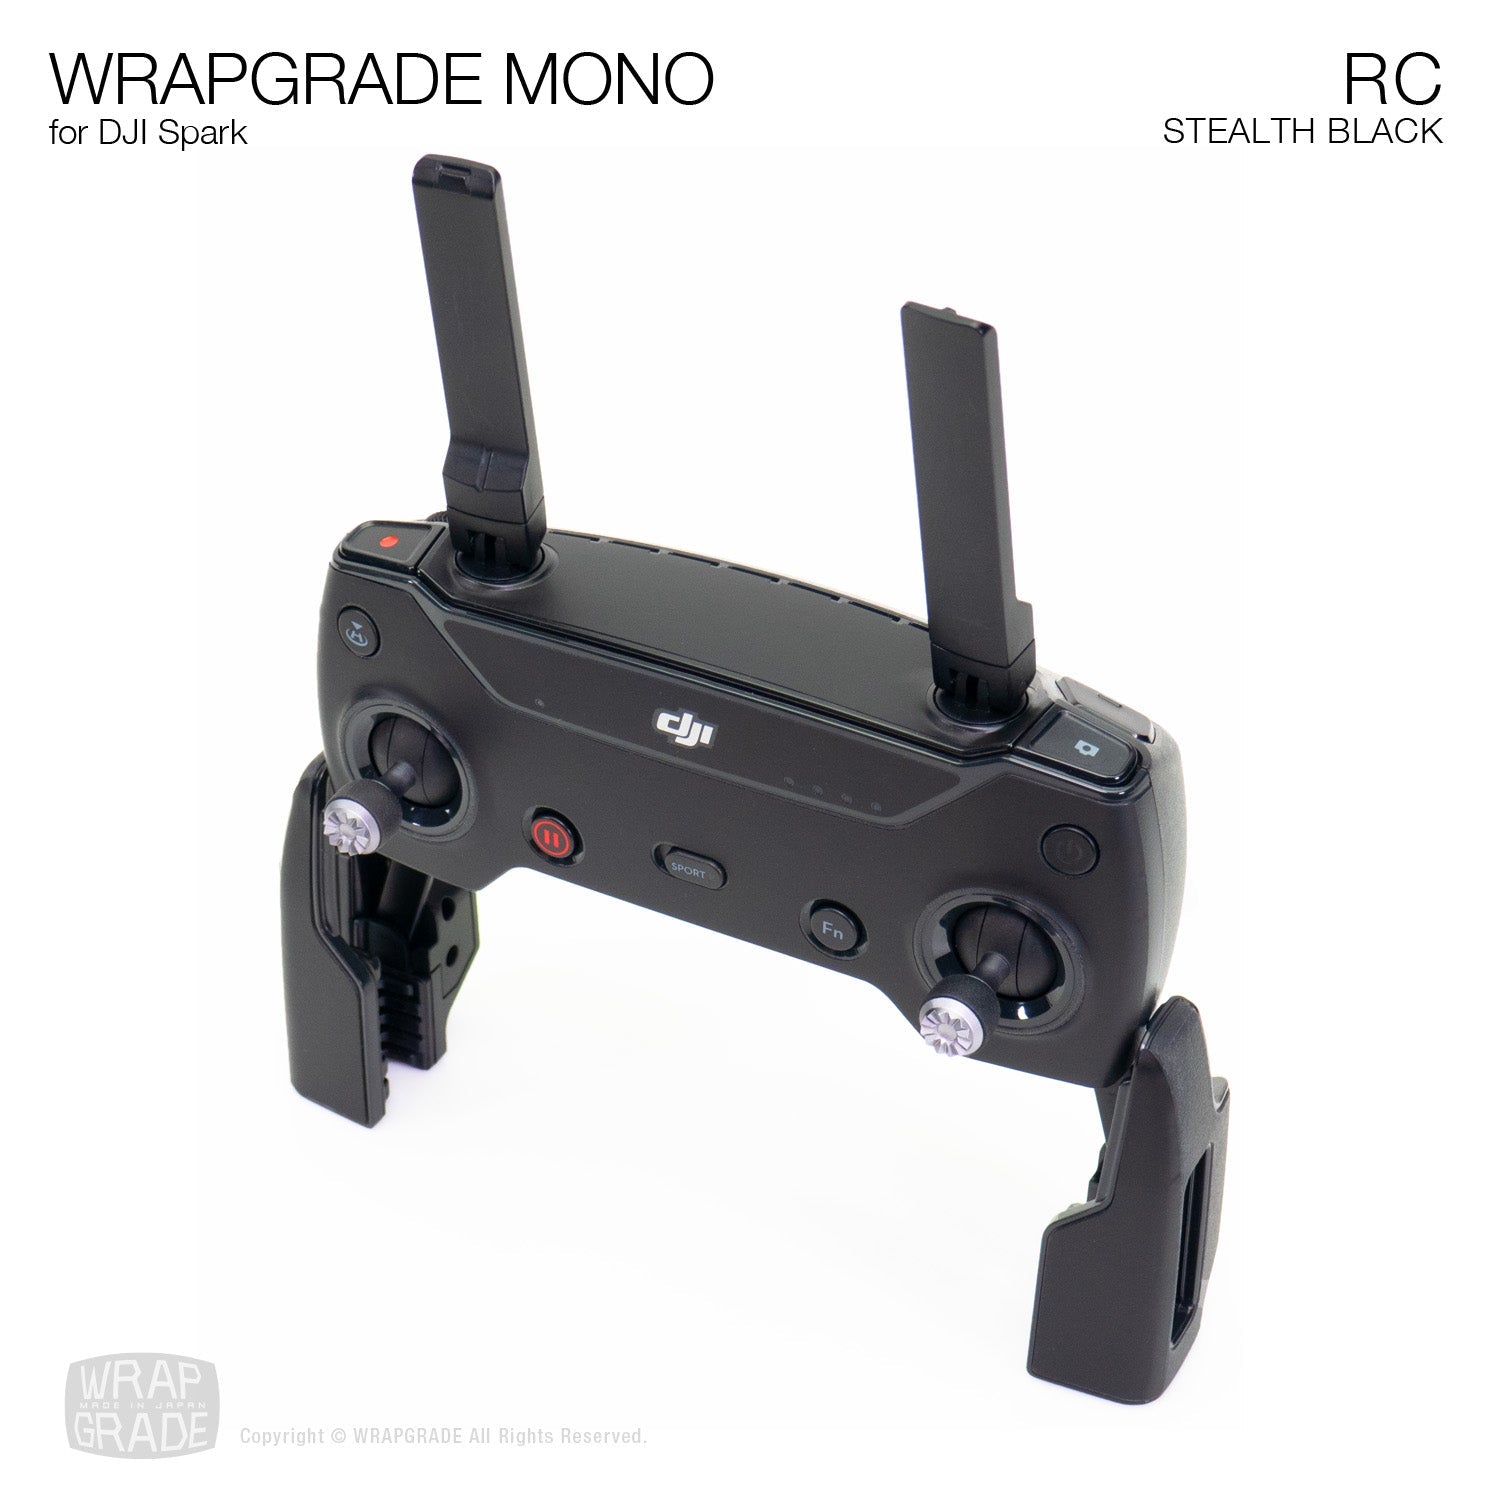 WRAPGRADE for DJI Spark 送信機用 スキンシール スーパーレッド